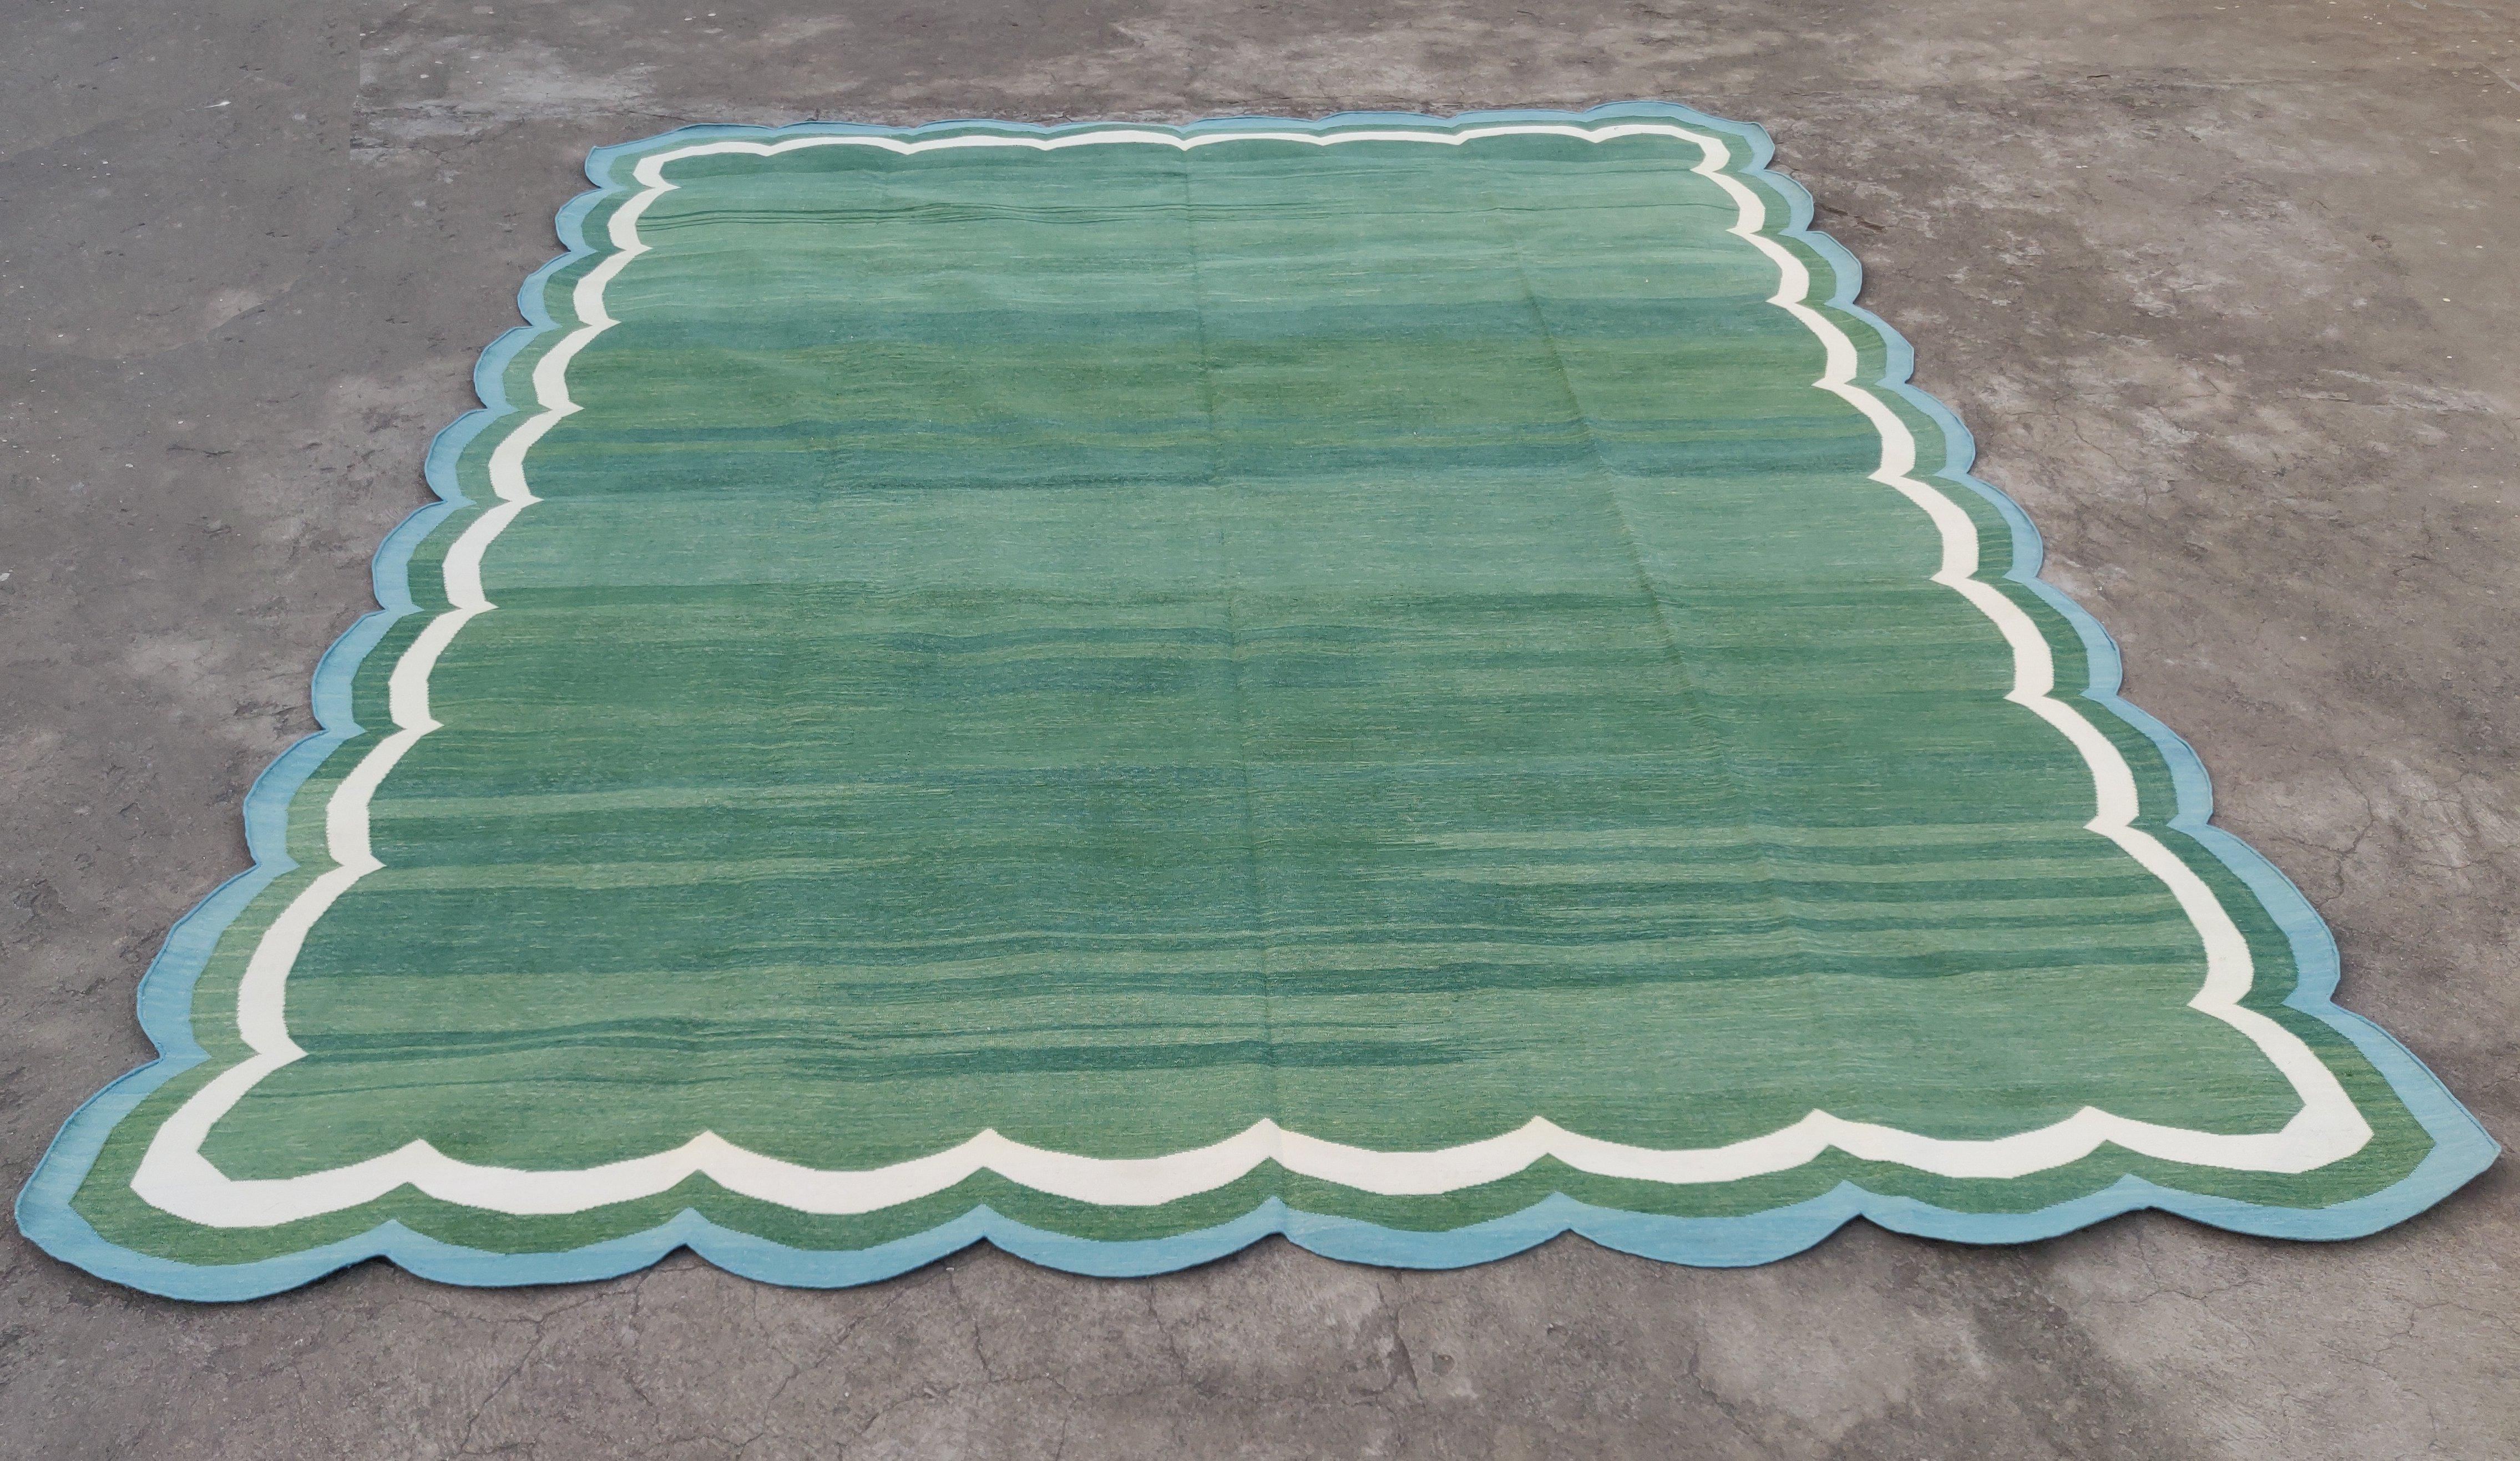 Handmade Cotton Flat Weave Rug, 8x10 Green And Blue Scalloped Indian Dhurrie Rug In New Condition For Sale In Jaipur, IN